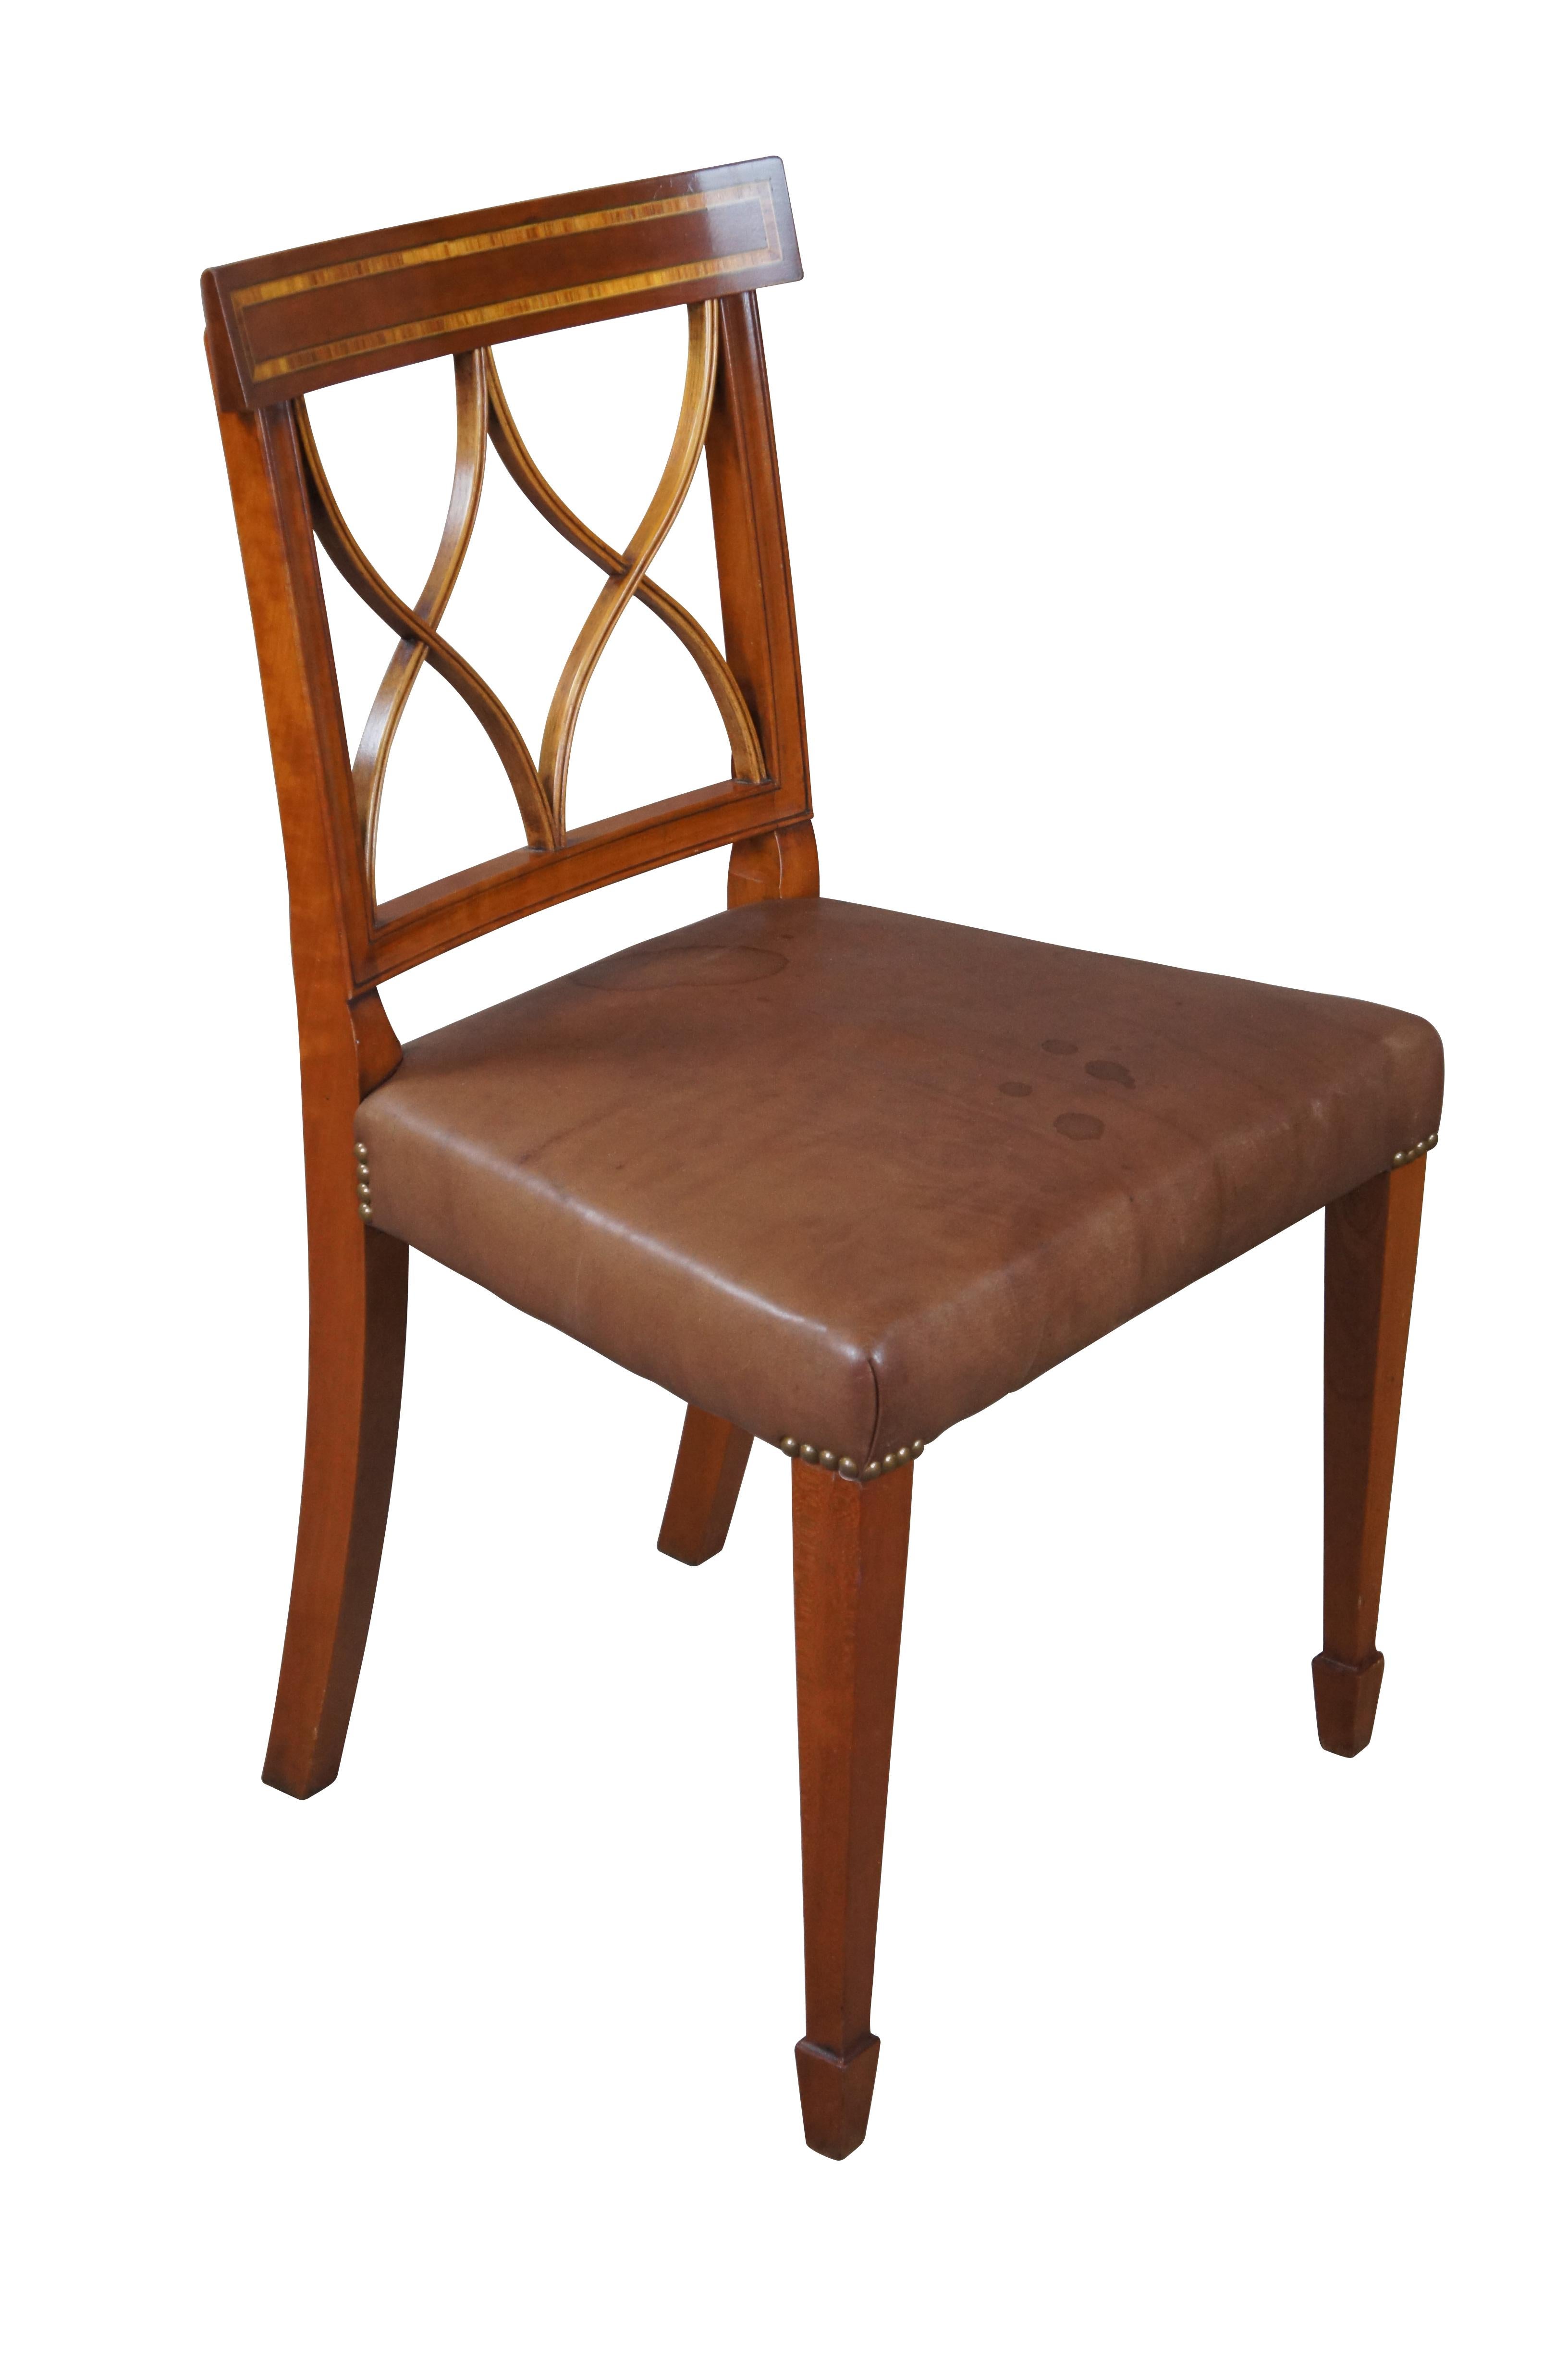 Arthur Brett English Sheraton Style Mahogany Inlaid Leather Dining Side Chair In Good Condition For Sale In Dayton, OH